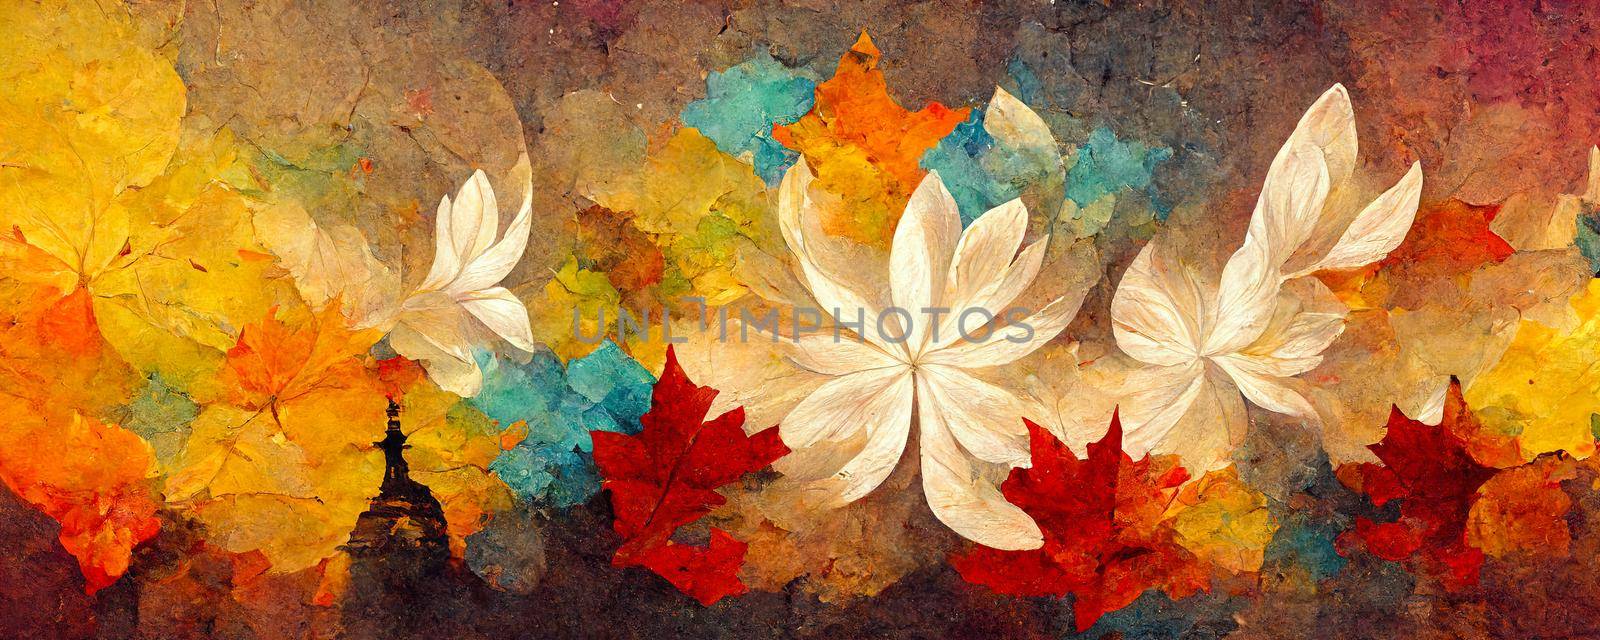 abstract flower illustration, creative flower background, autumn still life by TRMK